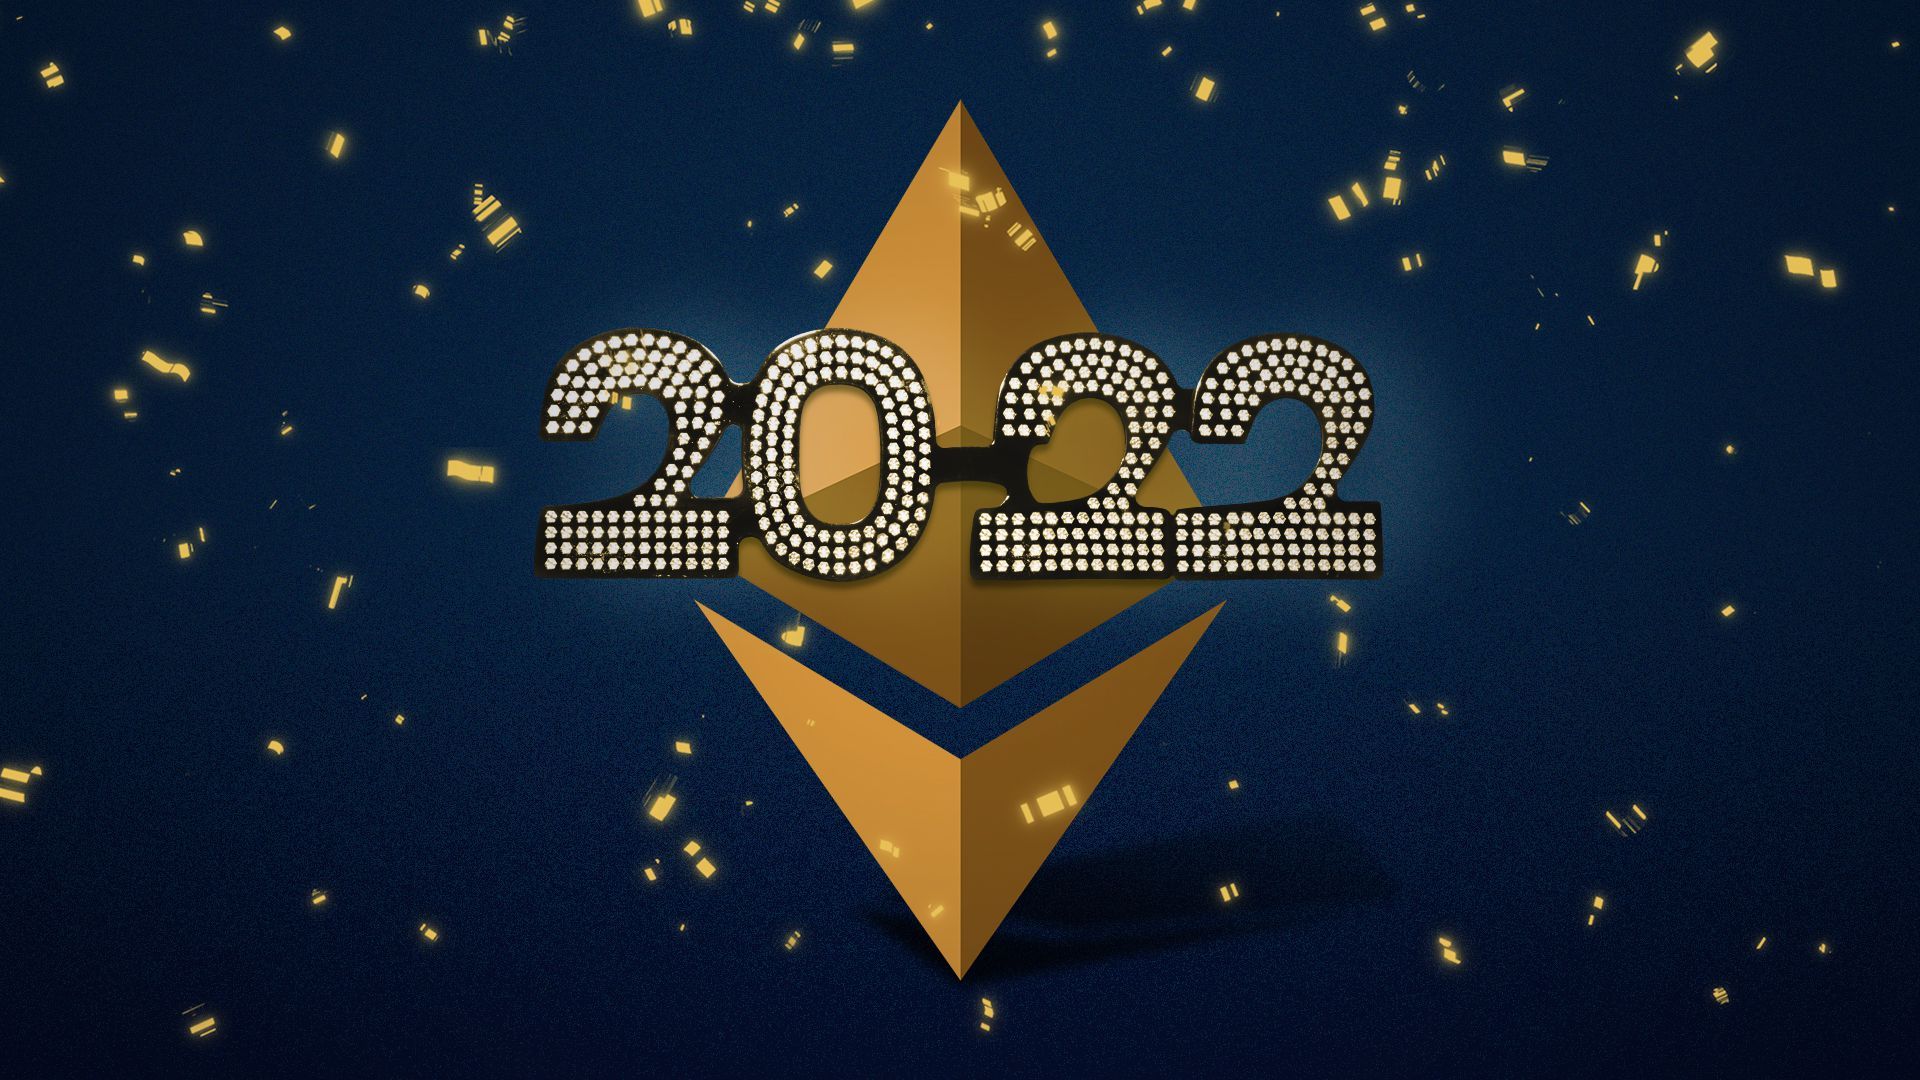 Illustration of the Ethereum wearing 2022 glasses, surrounded by confetti. 